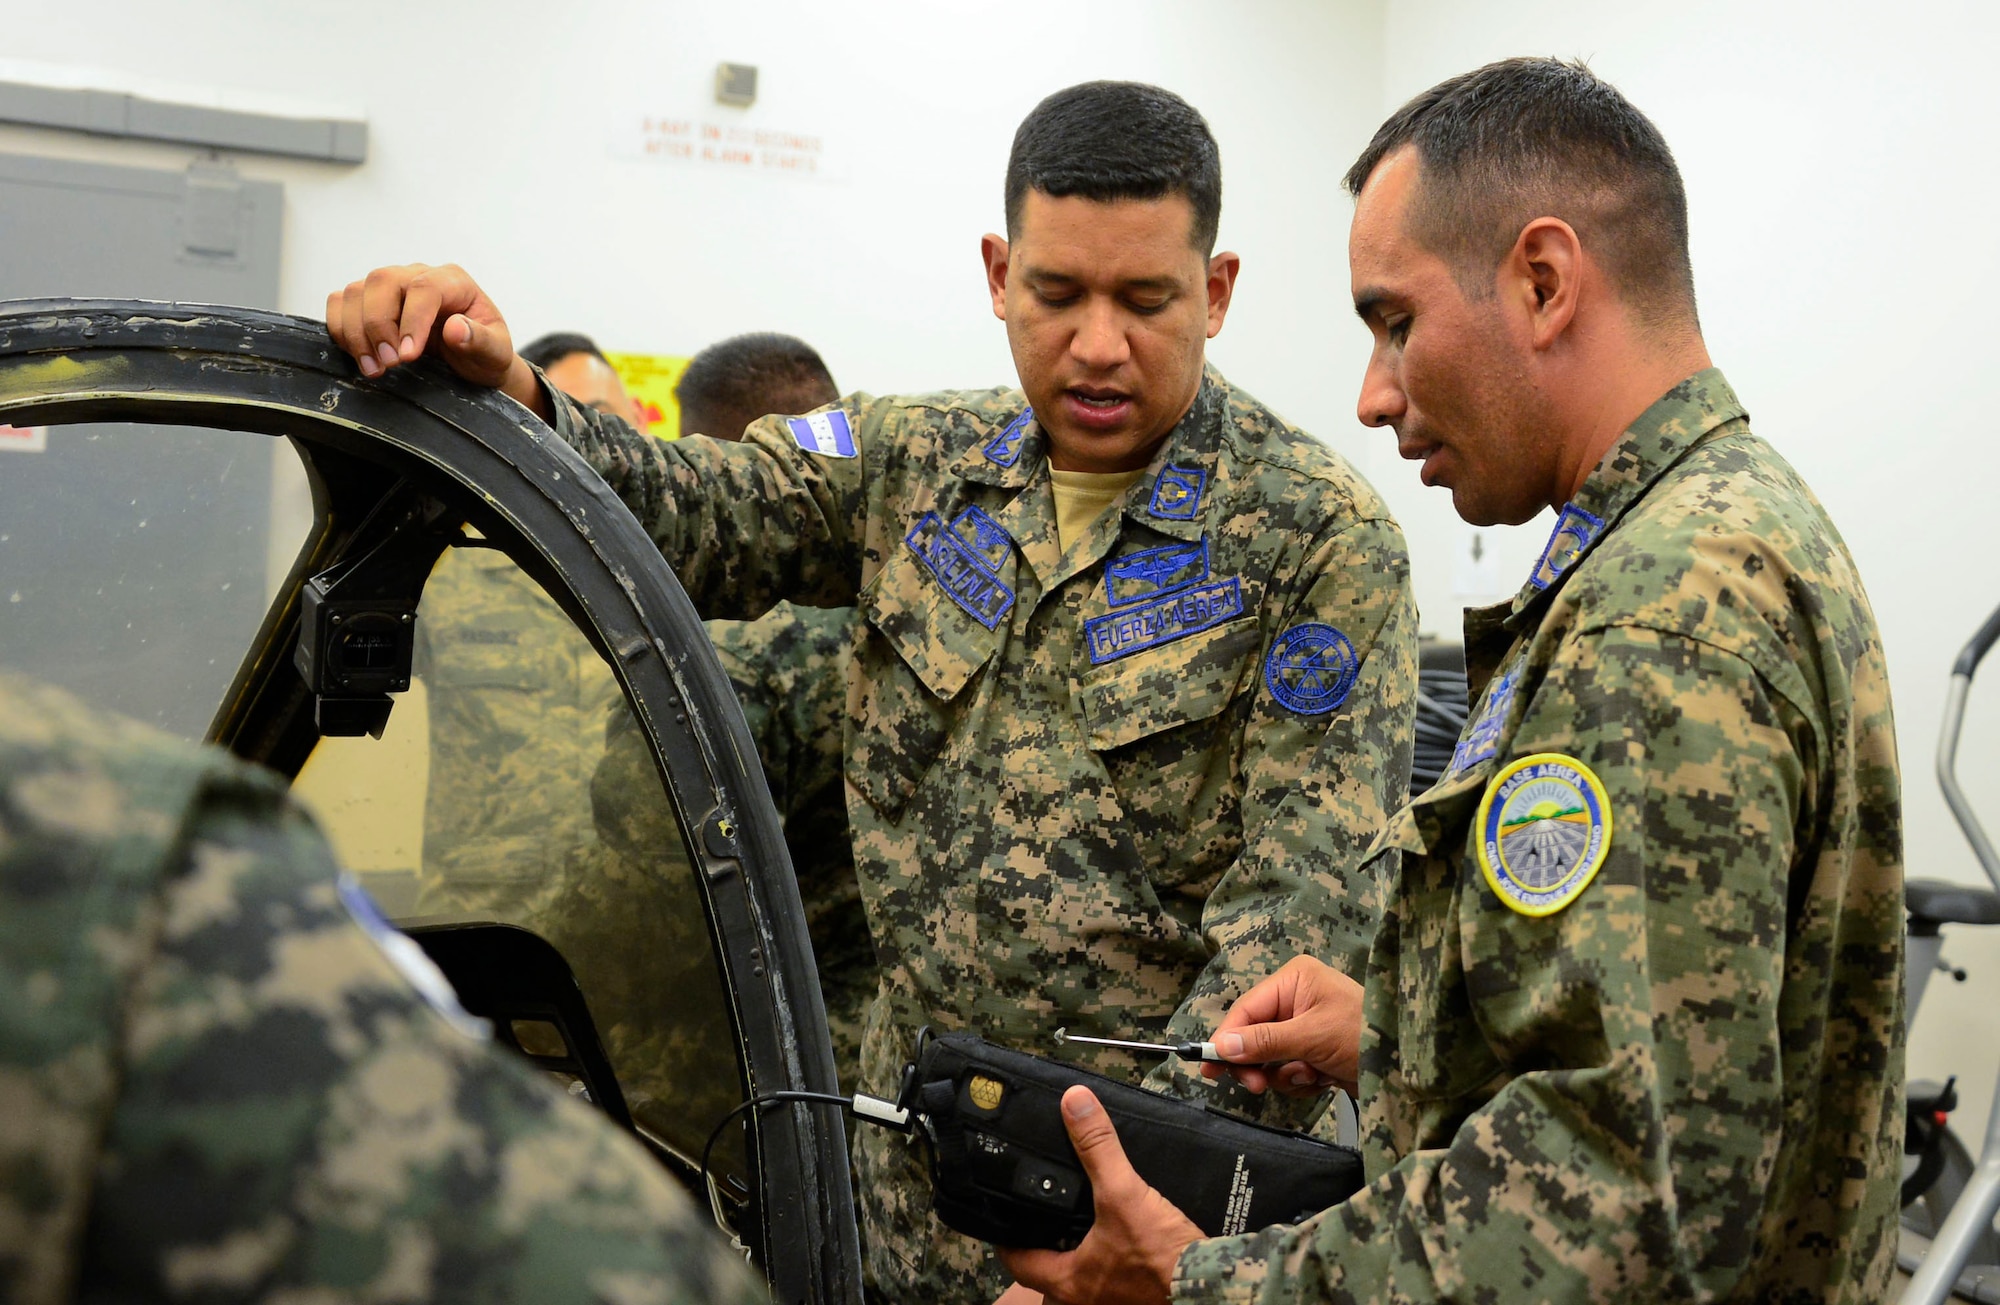 Honduran air force Master Sgts. Josué Molina and Elmer Villeda practice looking for discontinuities using an eddy current in an aircraft canopy during a subject matter expert exchange event with members from the 355th Equipment Maintenance Squadron nondestructive inspections lab on Davis-Monthan AFB, Ariz., Aug. 19, 2015. The eddy current uses a circulating electrical current induced in a conductor by an alternating magnetic field to locate discontinuities. When eddy currents encounter an obstacle, such as a crack, the surrounding currents become distorted. The five members from the Honduran air force teamed up with 12th Air Force (Air Forces Southern) and the 355th EMS for a subject matter expert exchange that focused on a variety of nondestructive inspections lab processes and maintenance safety standards. (U.S. Air Force photo by Tech. Sgt. Heather Redman/Released)